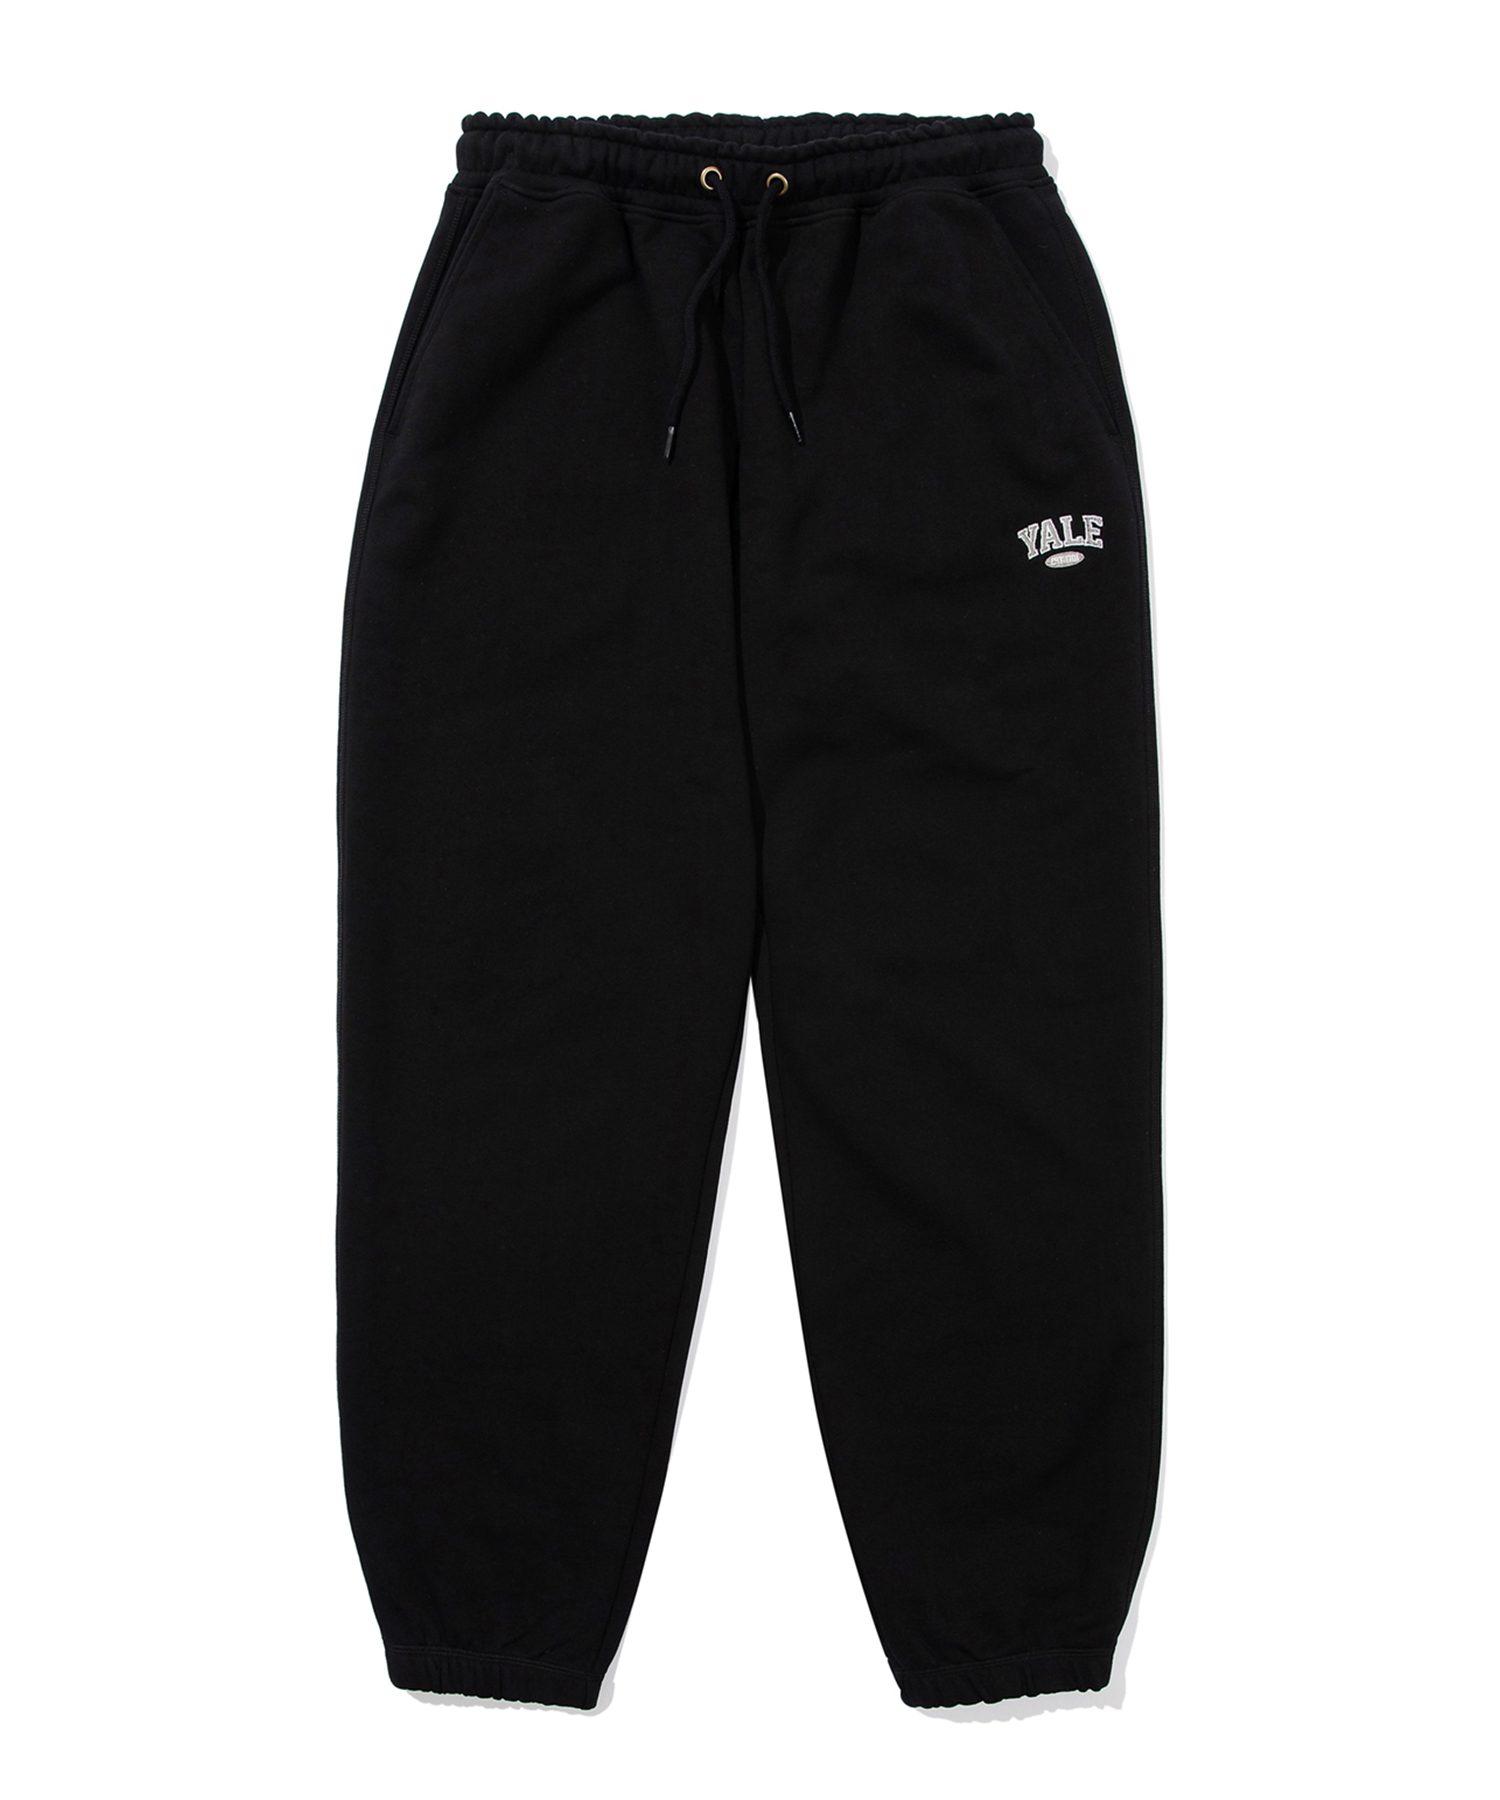 WIDE FIT SMALL 2 TONE ARCH SWEAT PANTS BLACK